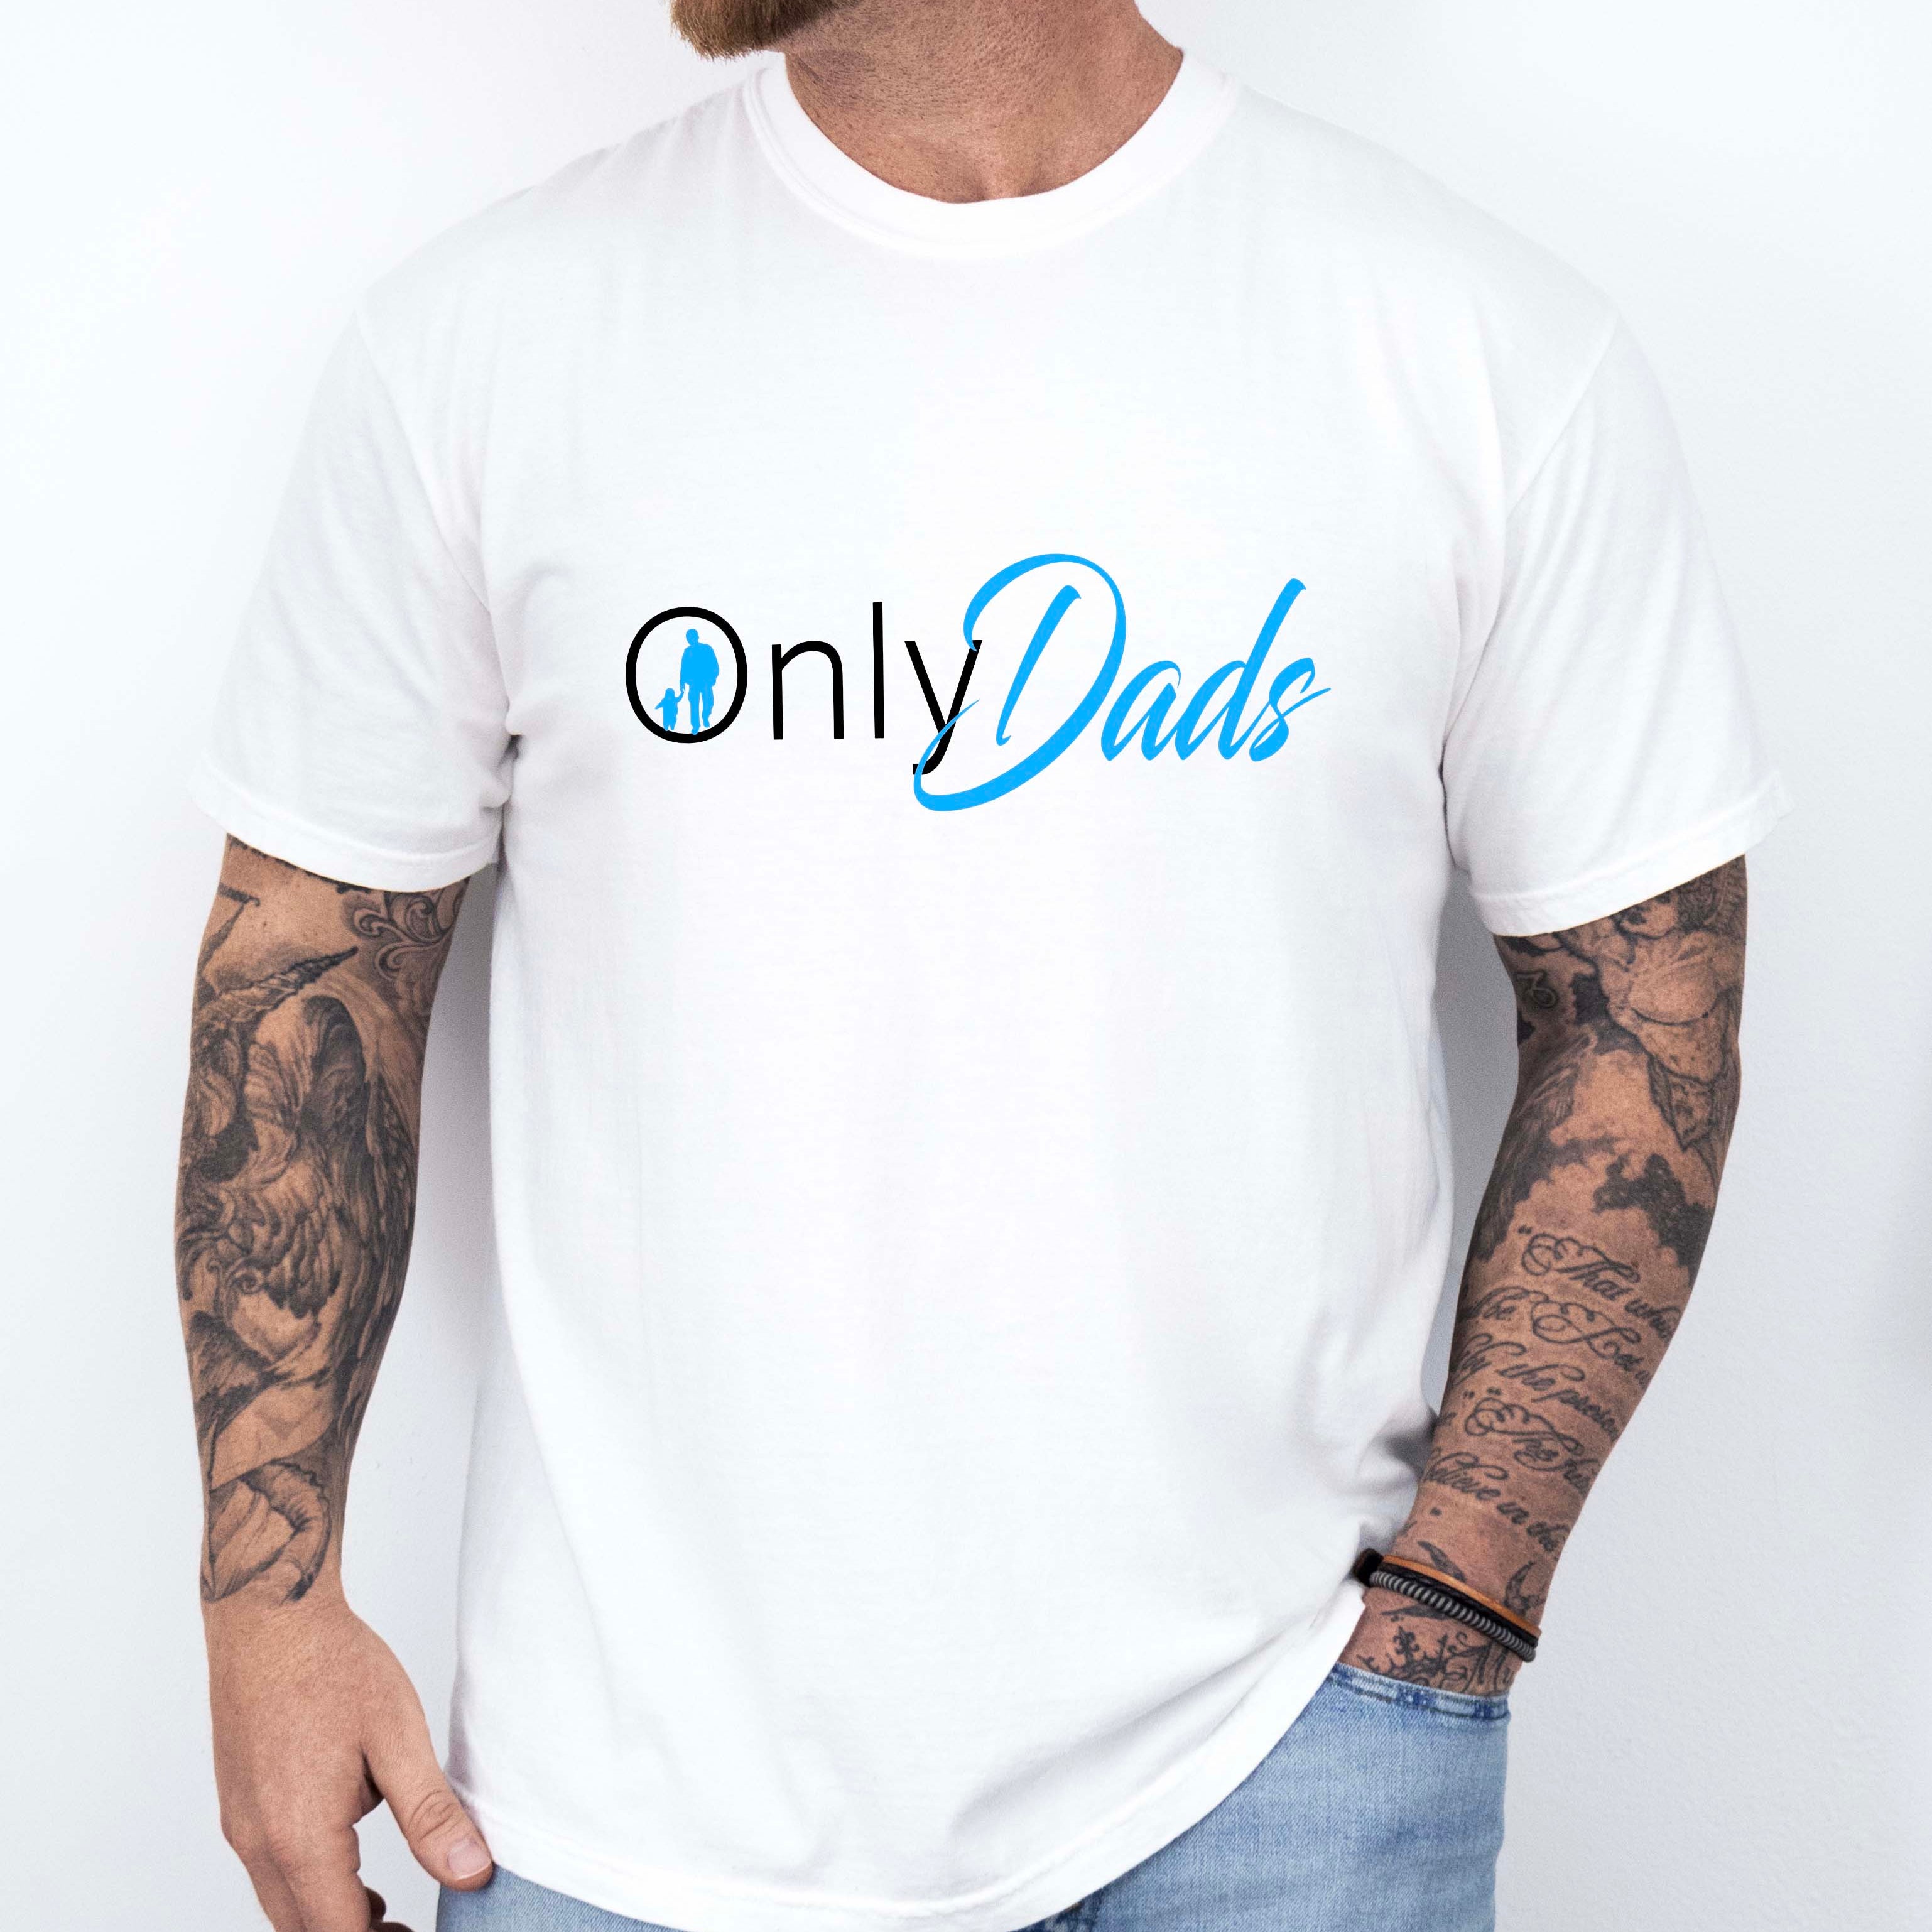 Only Dads Funny Tee